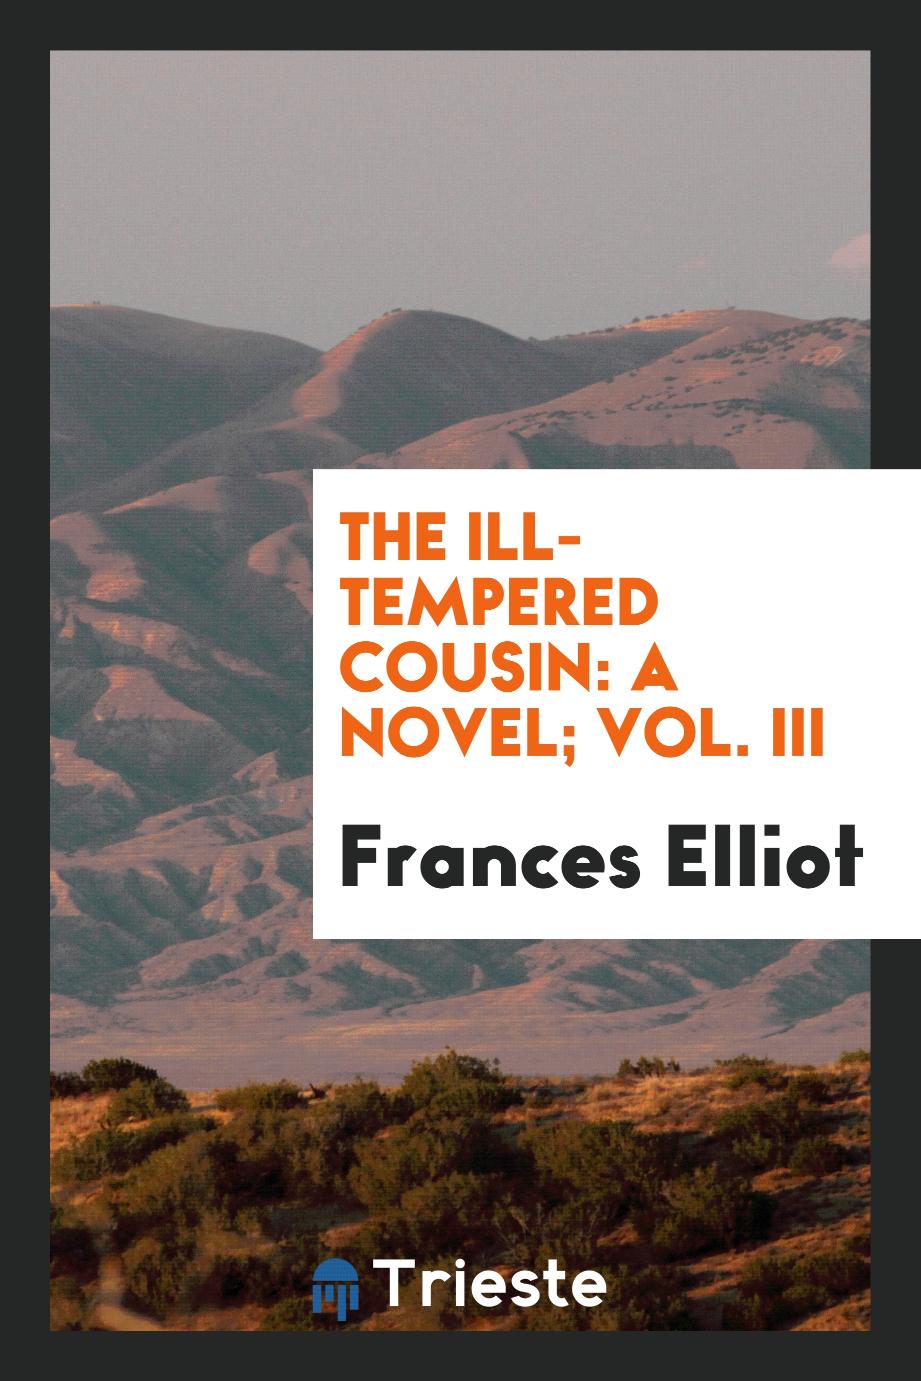 The ill-tempered cousin: a novel; Vol. III